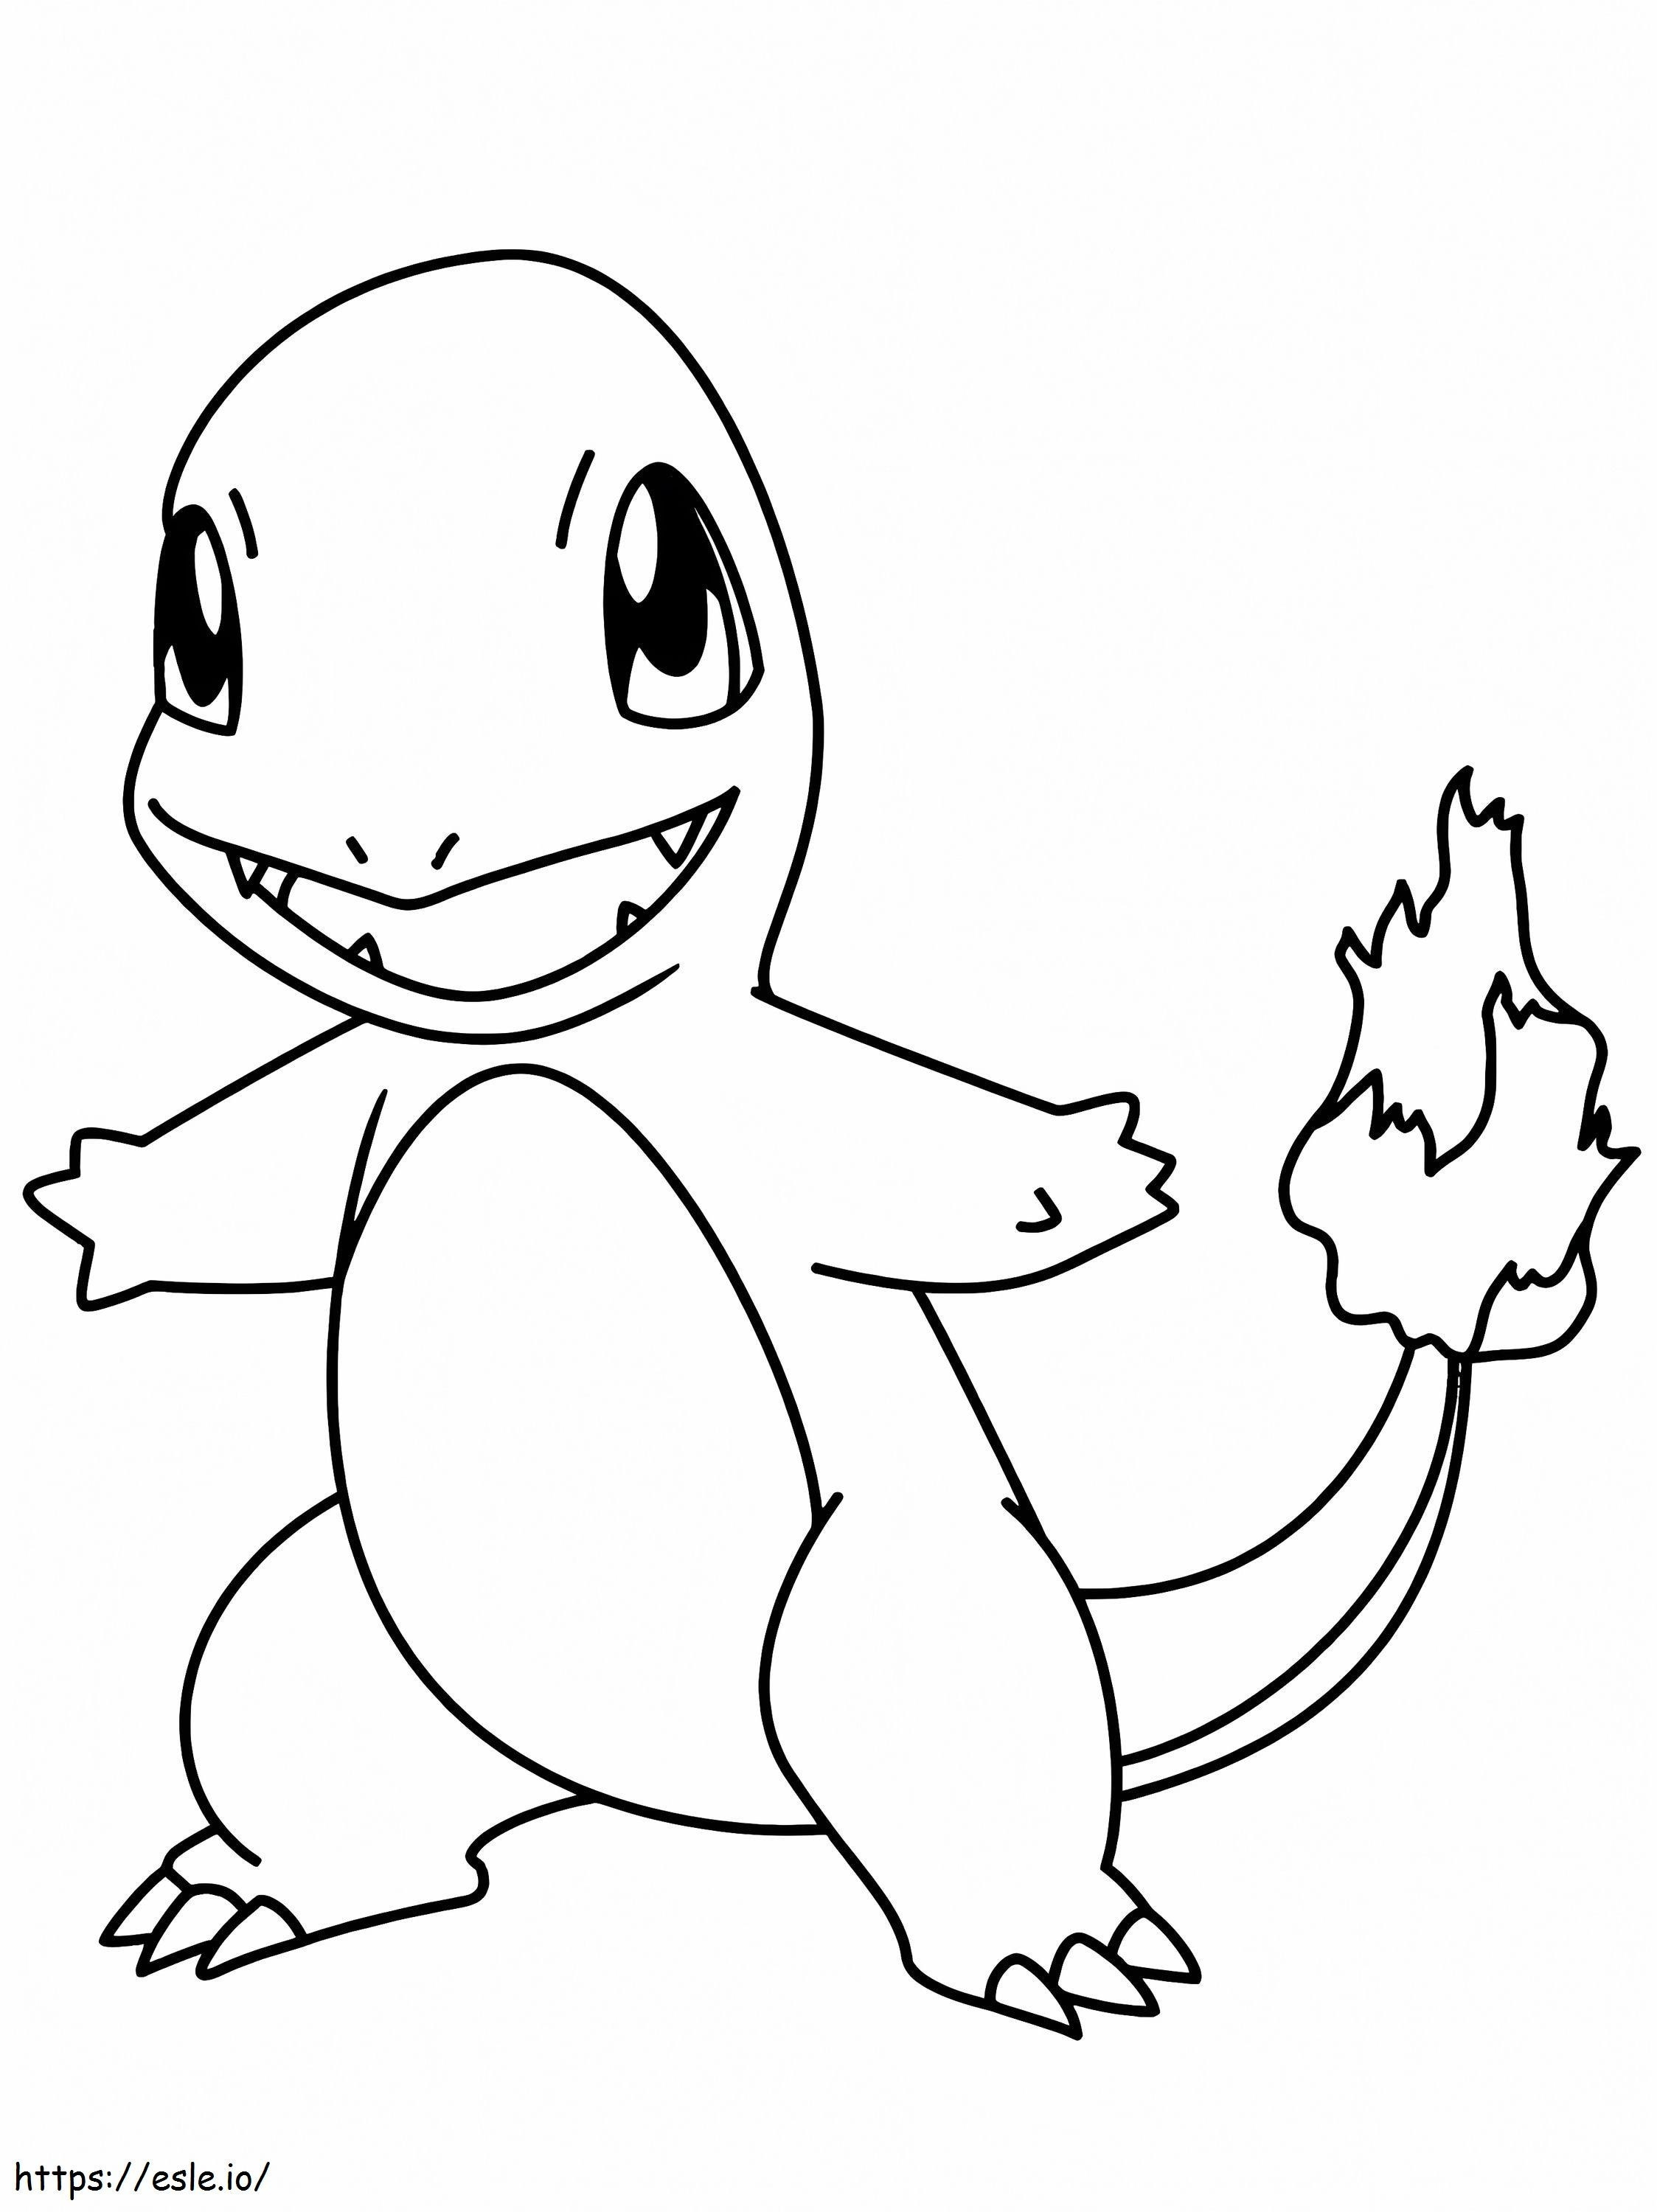 Smiling Salameche coloring page